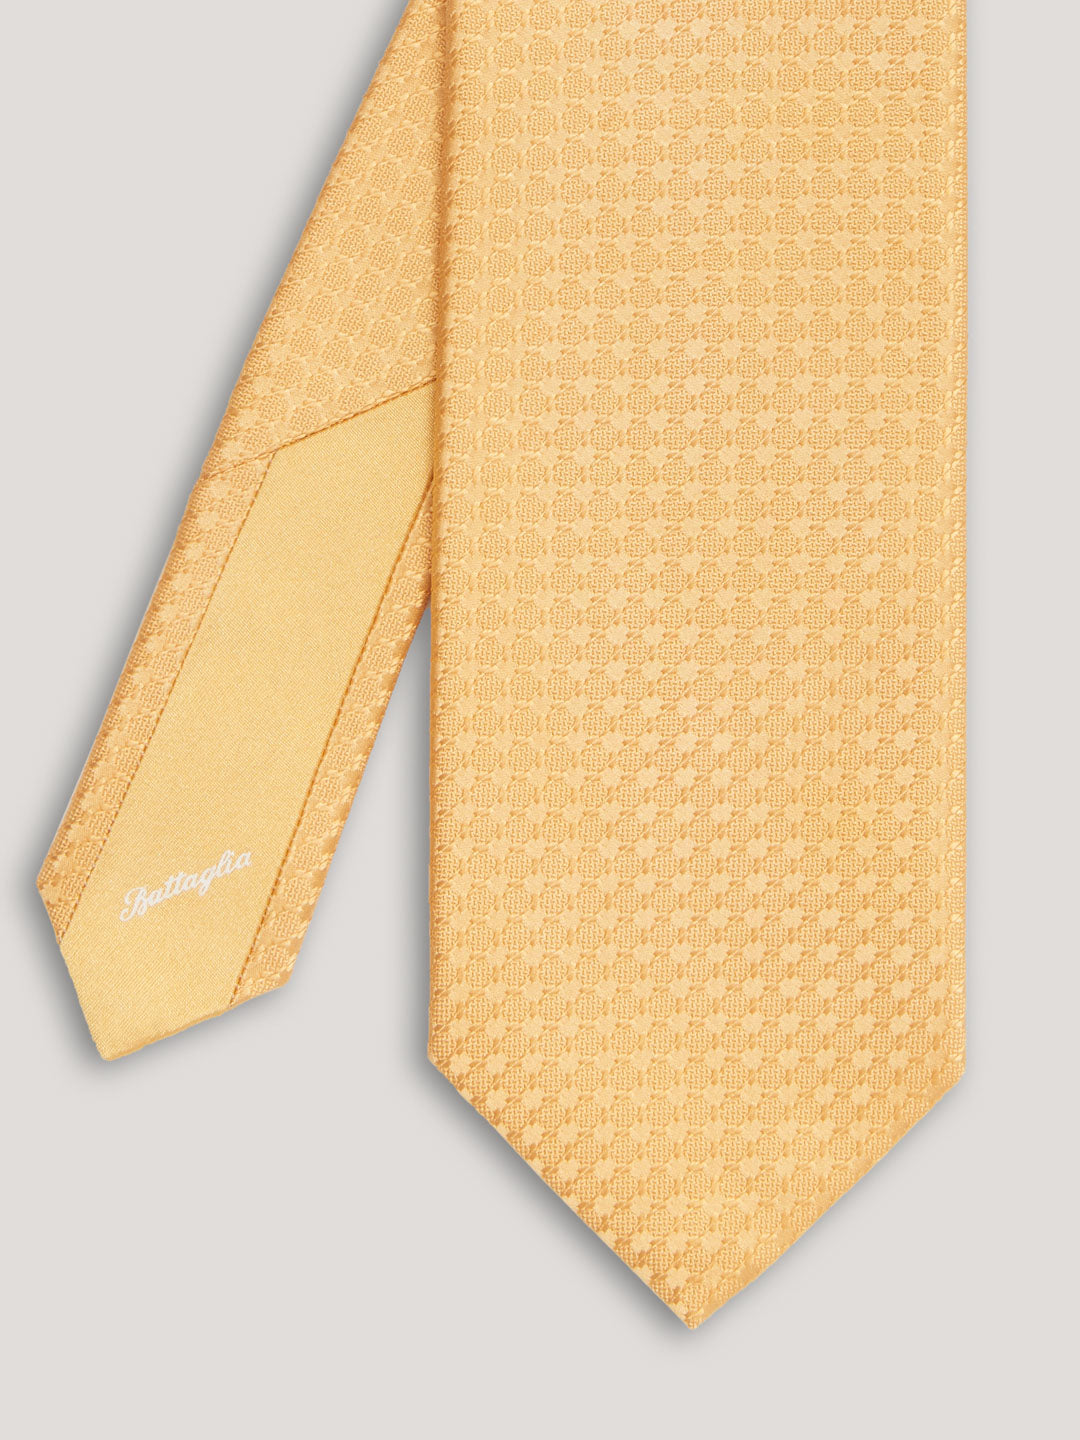 Yellow tone on tone small pattern tie. 